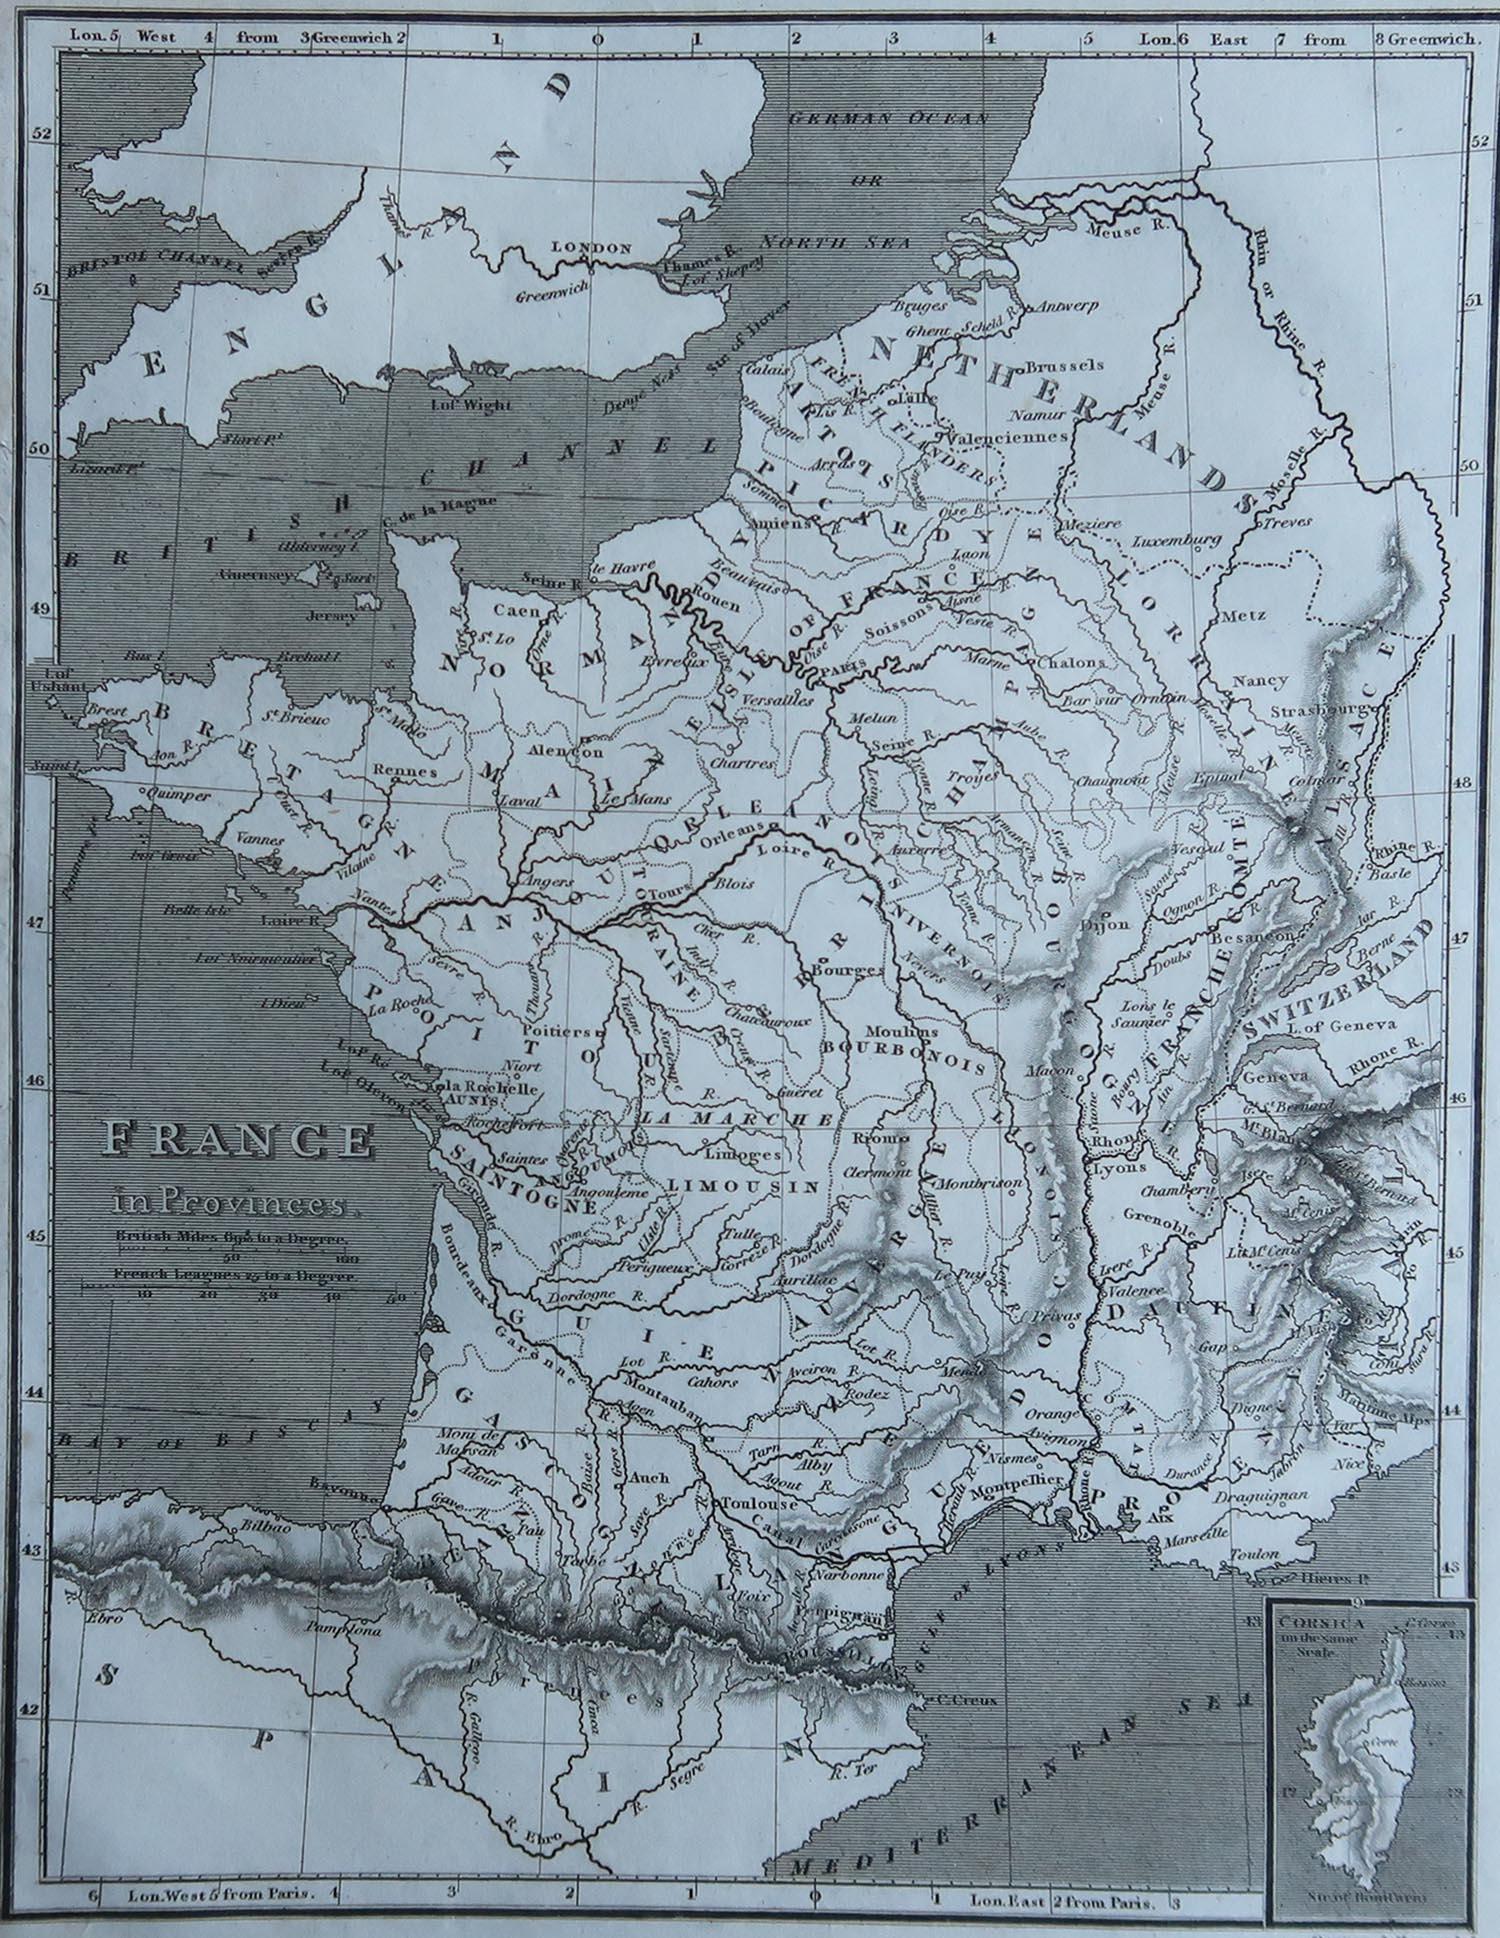 Great map of France

Copper-plate engraving by Cooper

Published by Sherwood, Neely & Jones.

Dated 1809

Unframed.